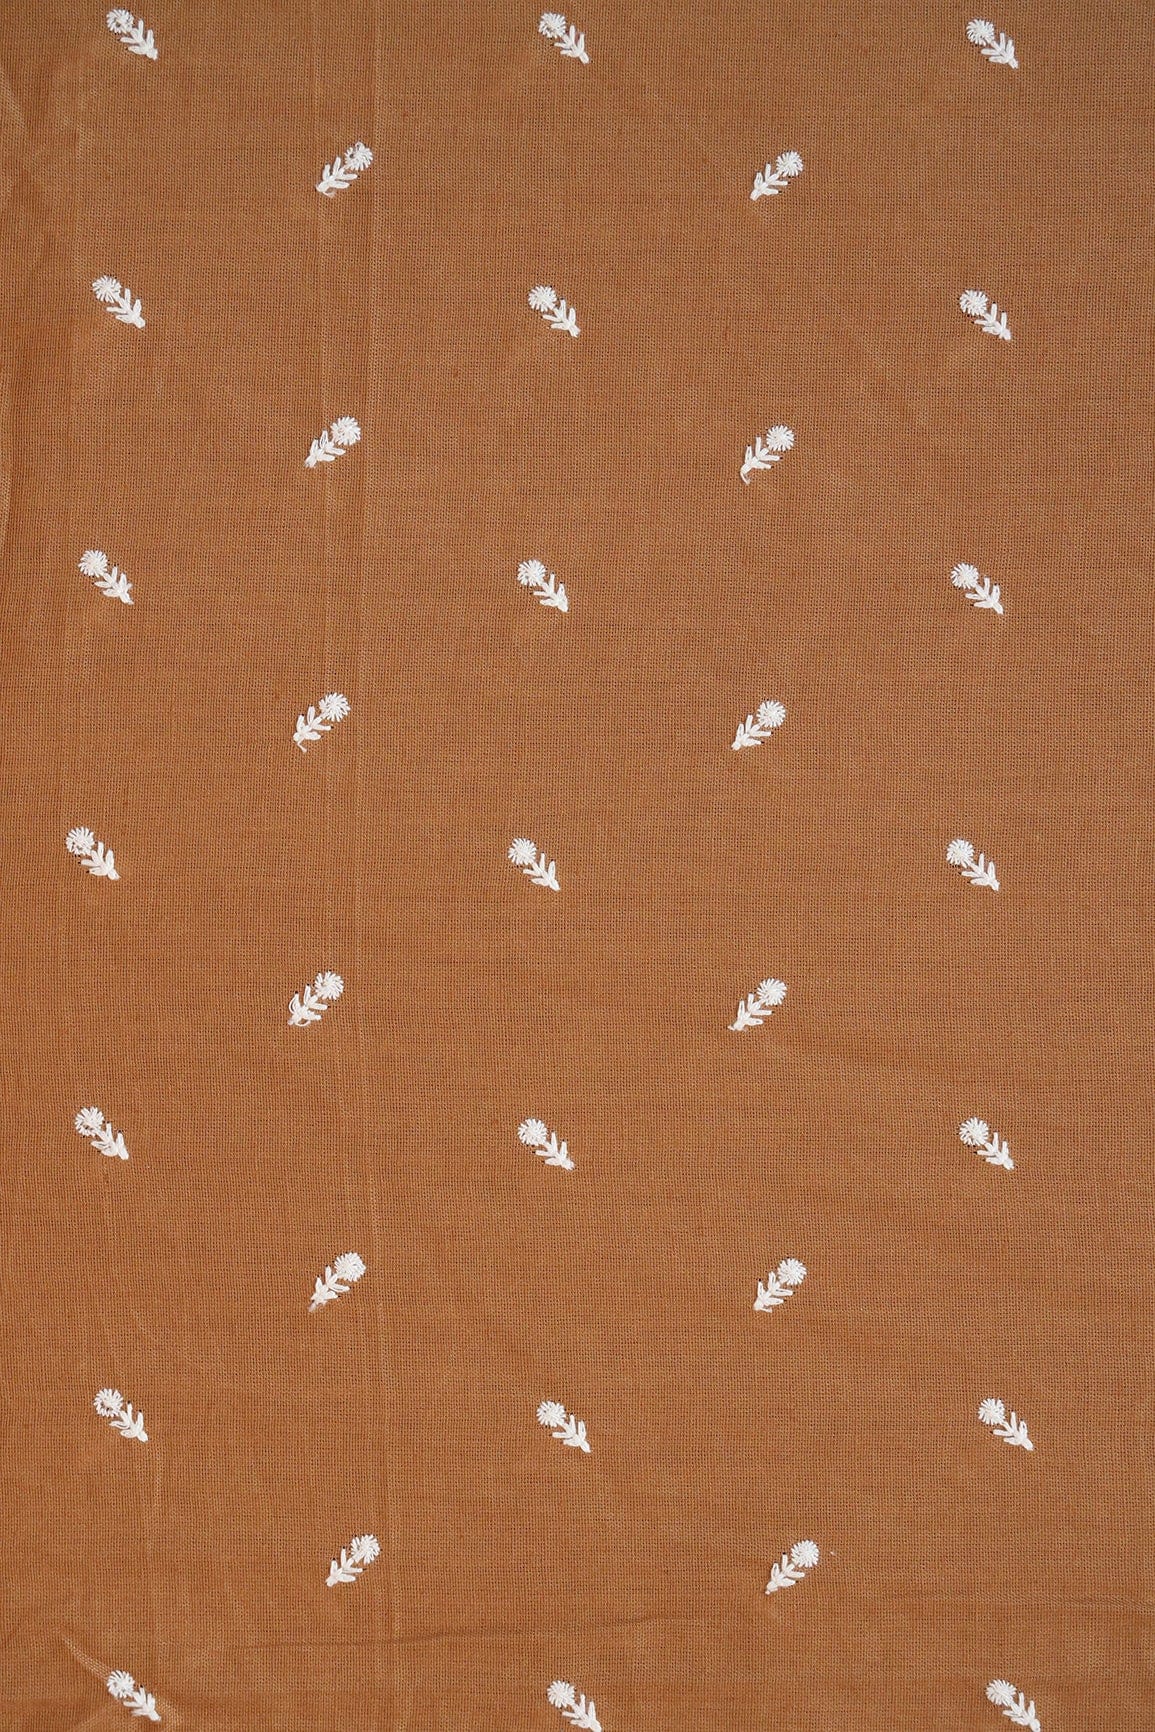 doeraa Embroidery Fabrics White Thread Small Floral Motif Embroidery Work On Copper Brown Cotton Linen Fabric